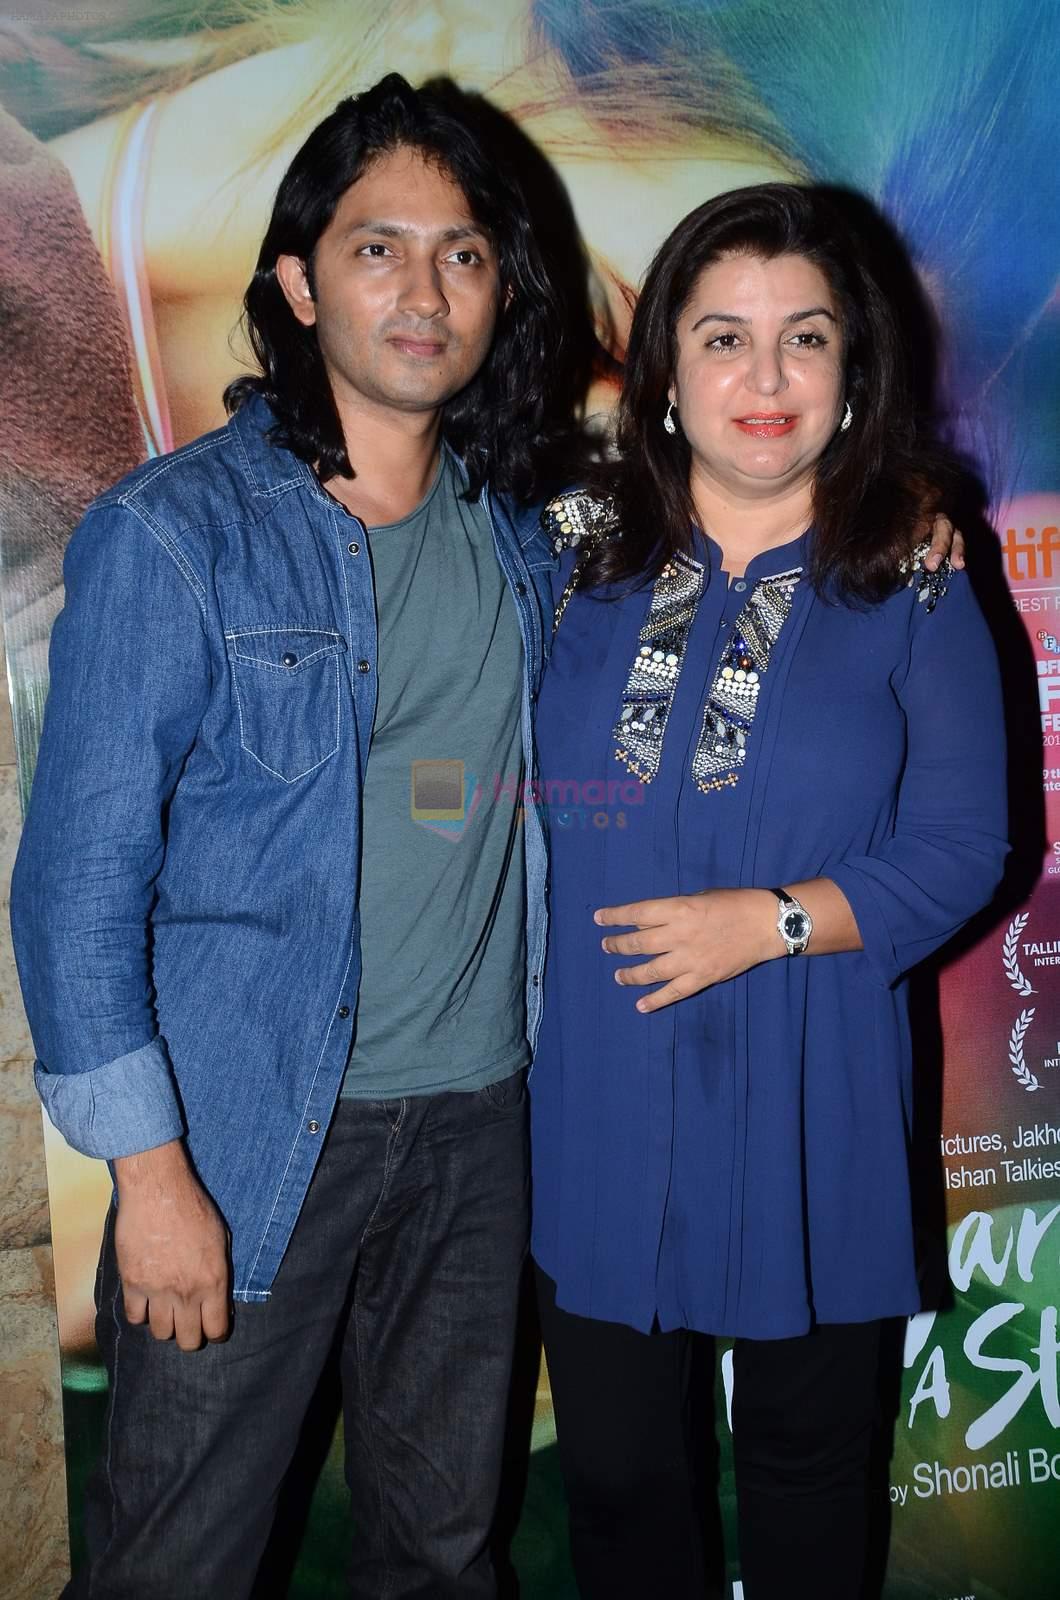 Farah Khan, Shirish Kunder at the special screening of Margarita With A Straw in Lightbox on 13th April 2015